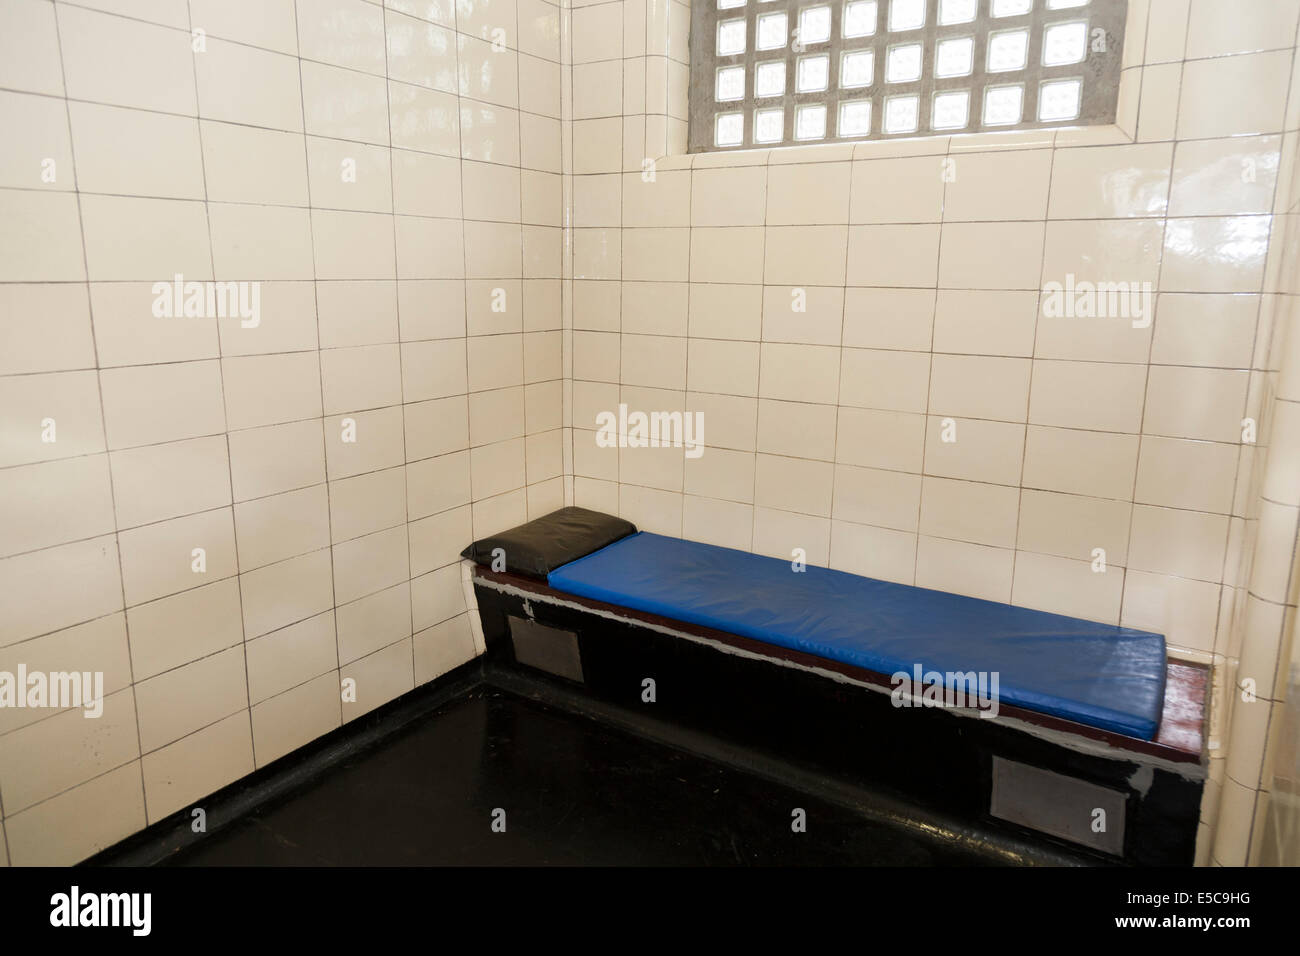 Metropolitan Police service ( old / traditional ) Police station custody suite / suites / cell / cells in Twickenham. London UK Stock Photo